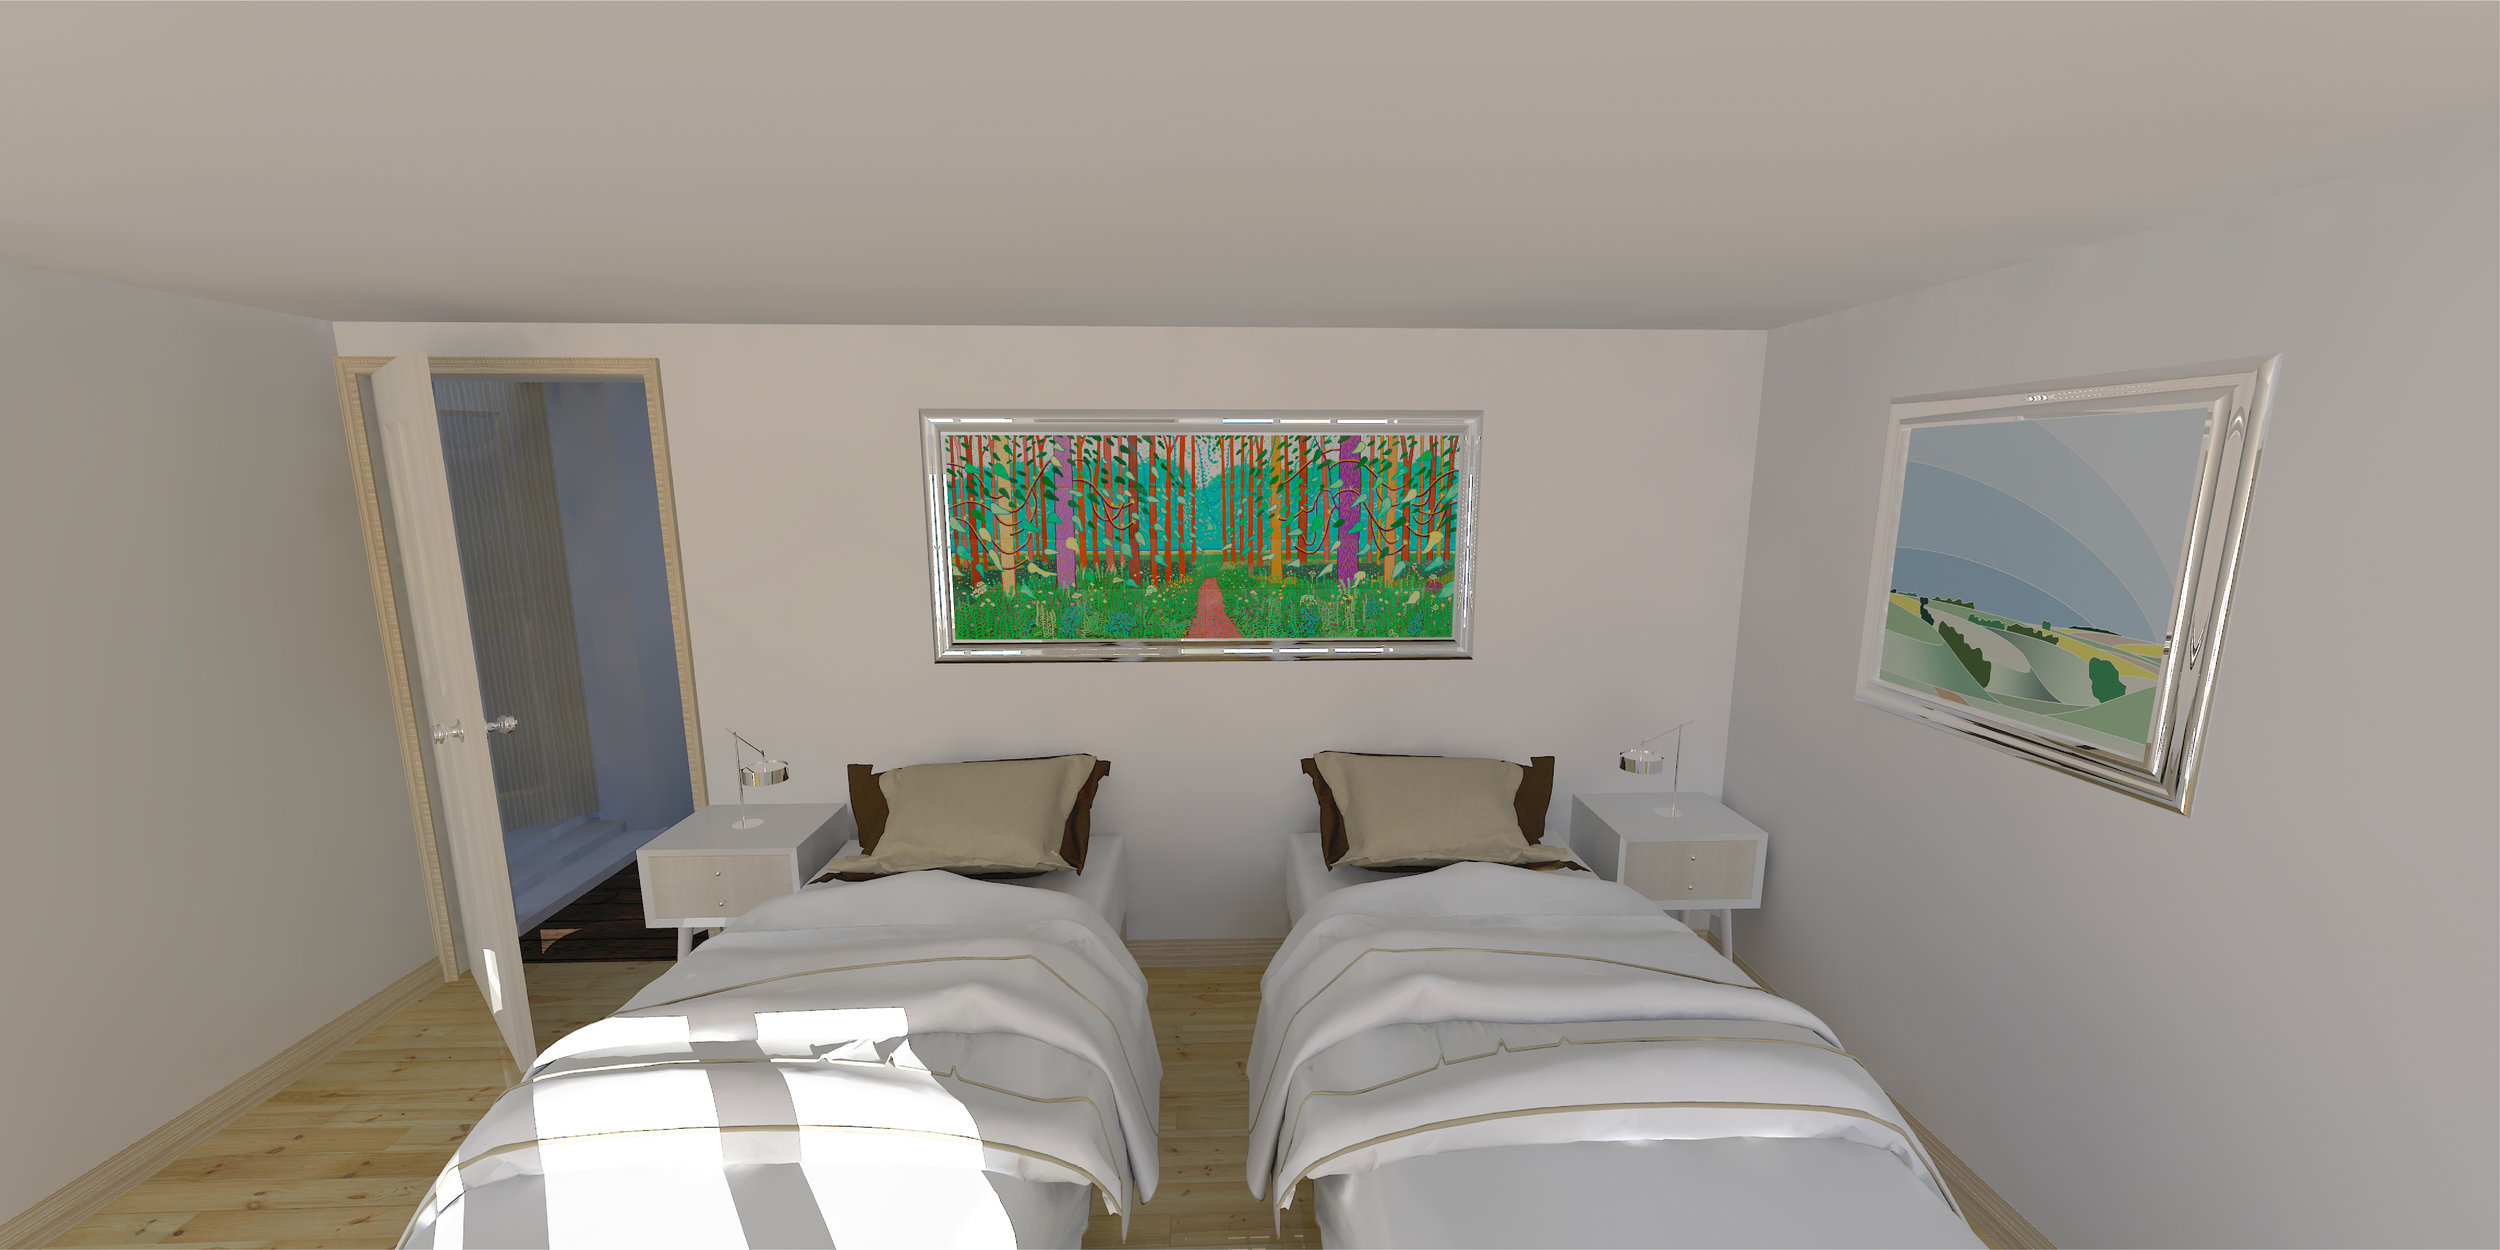 Proposed Guest Bedroom